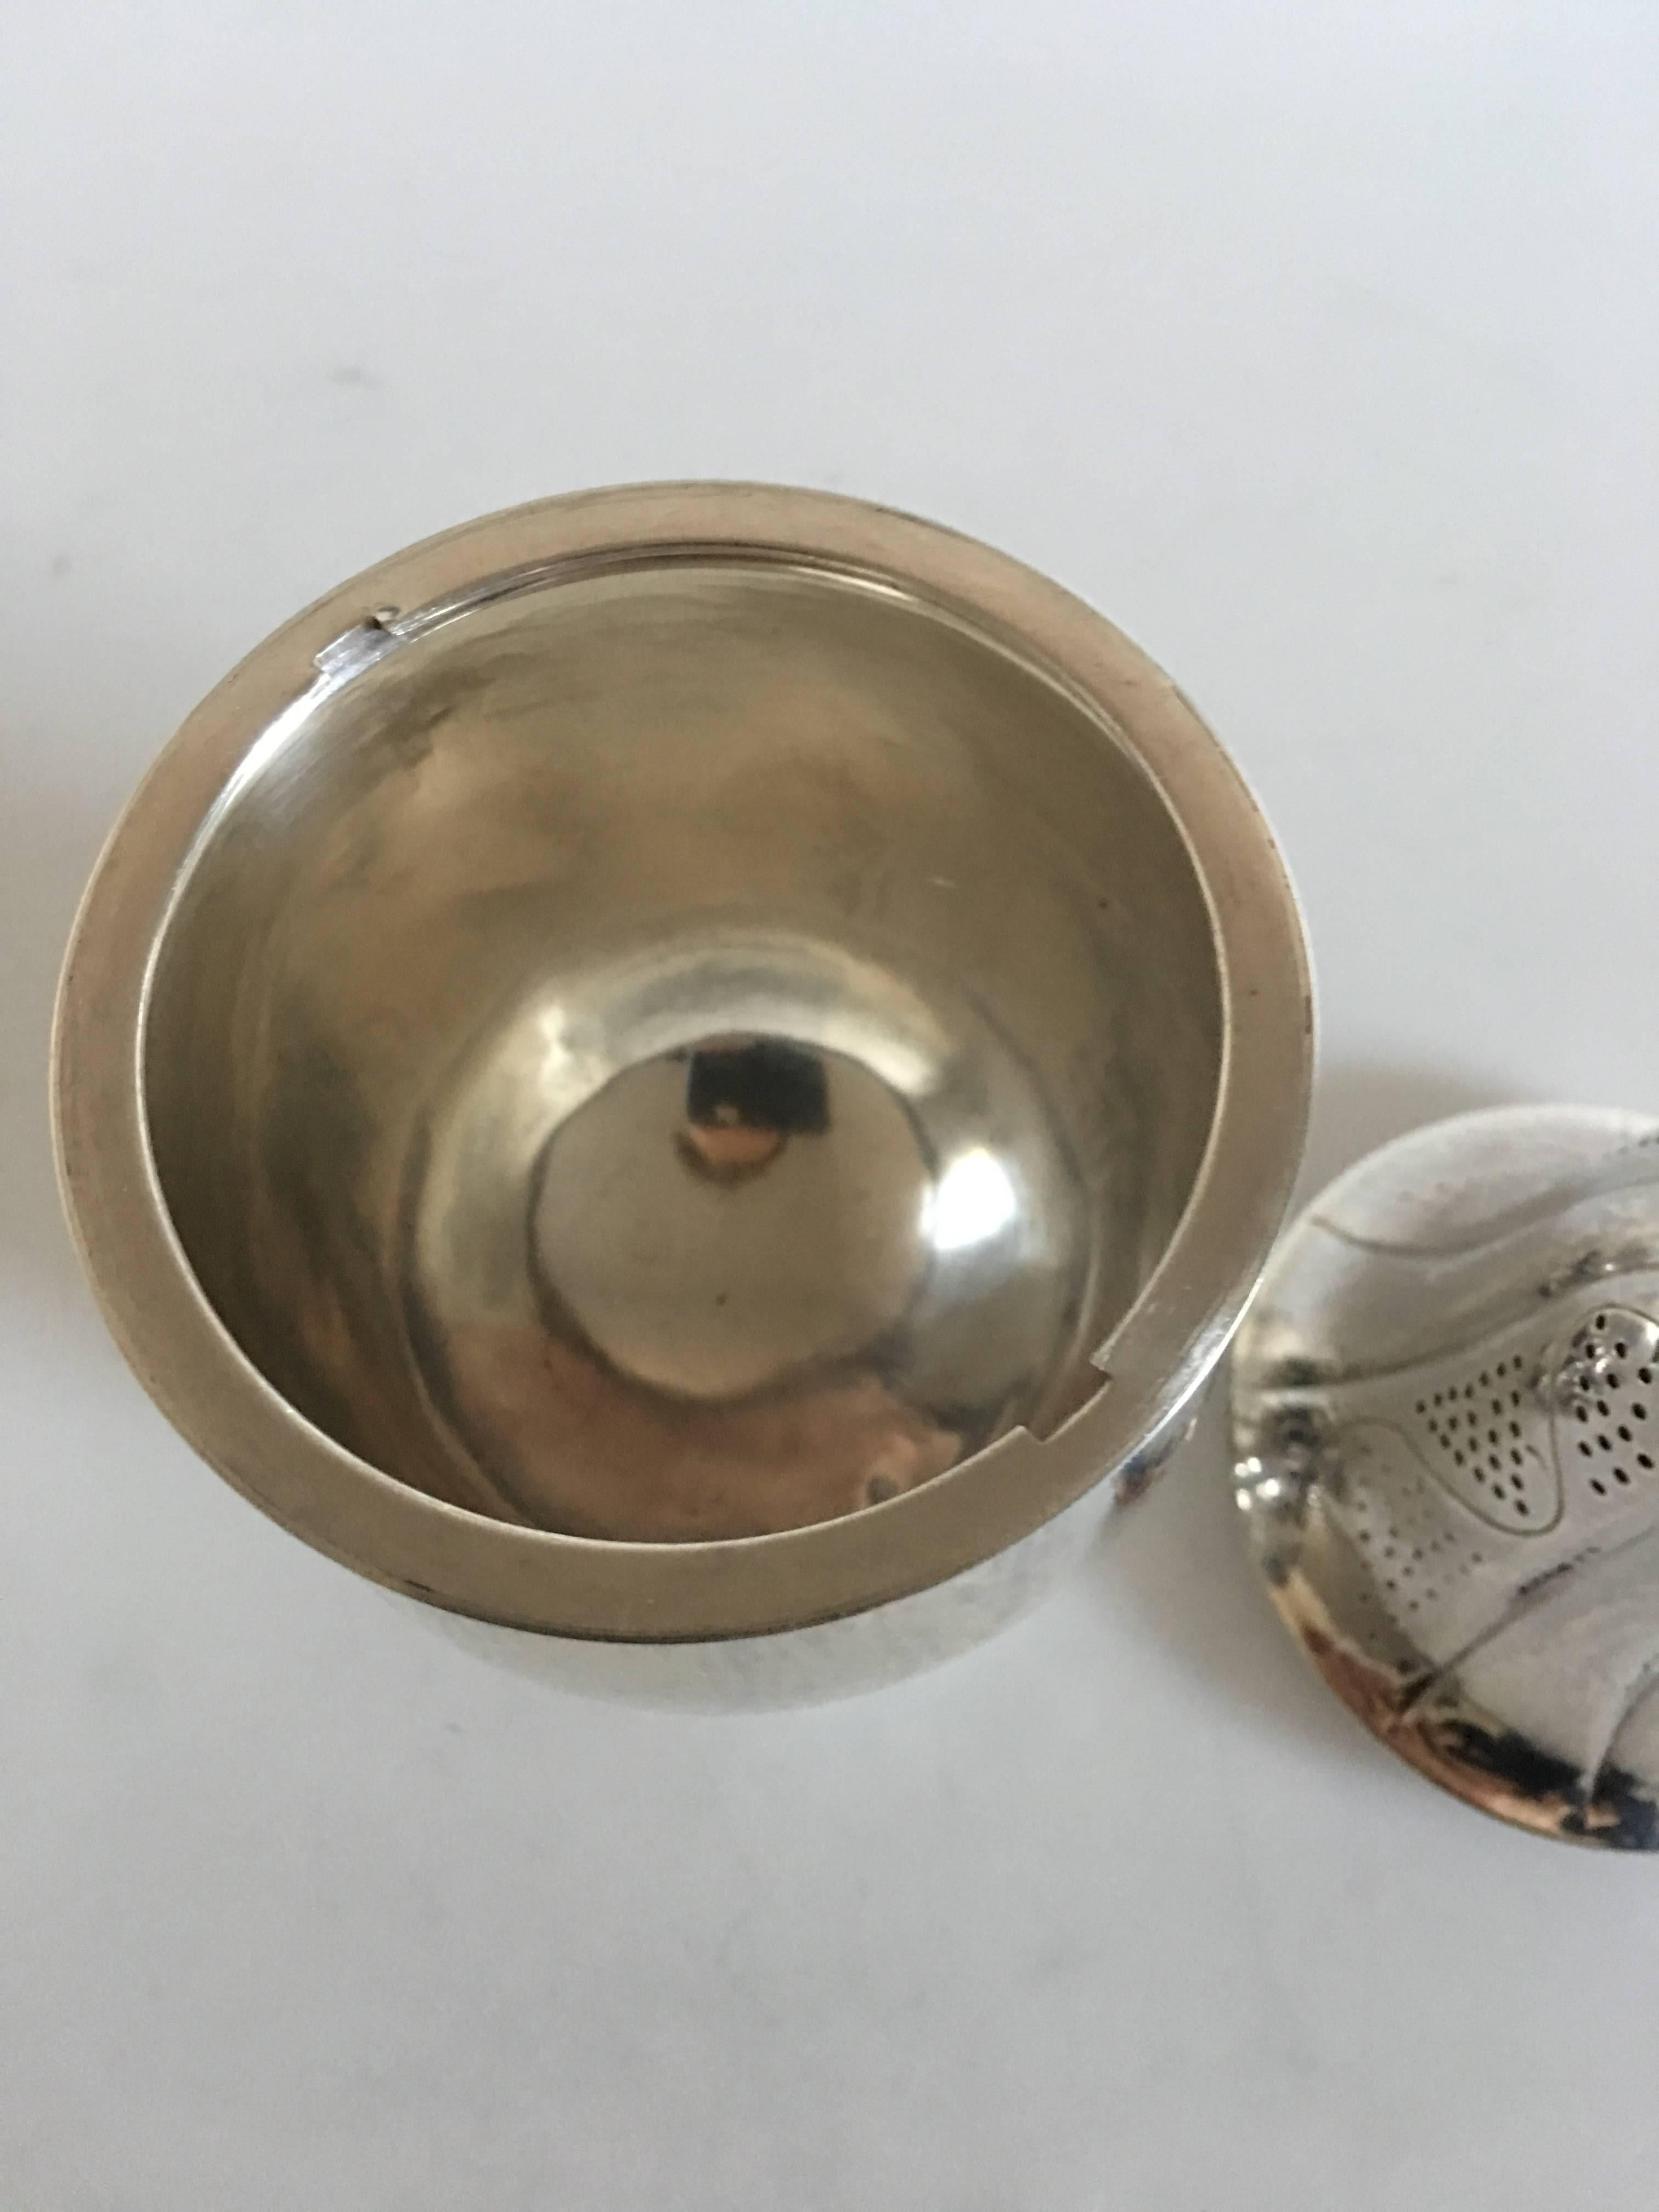 Georg Jensen sterling silver grape sugar caster #296, from 1933-1944. Measures: Weight 264 grams (9.35 oz). 18 cm tall (7 3/32